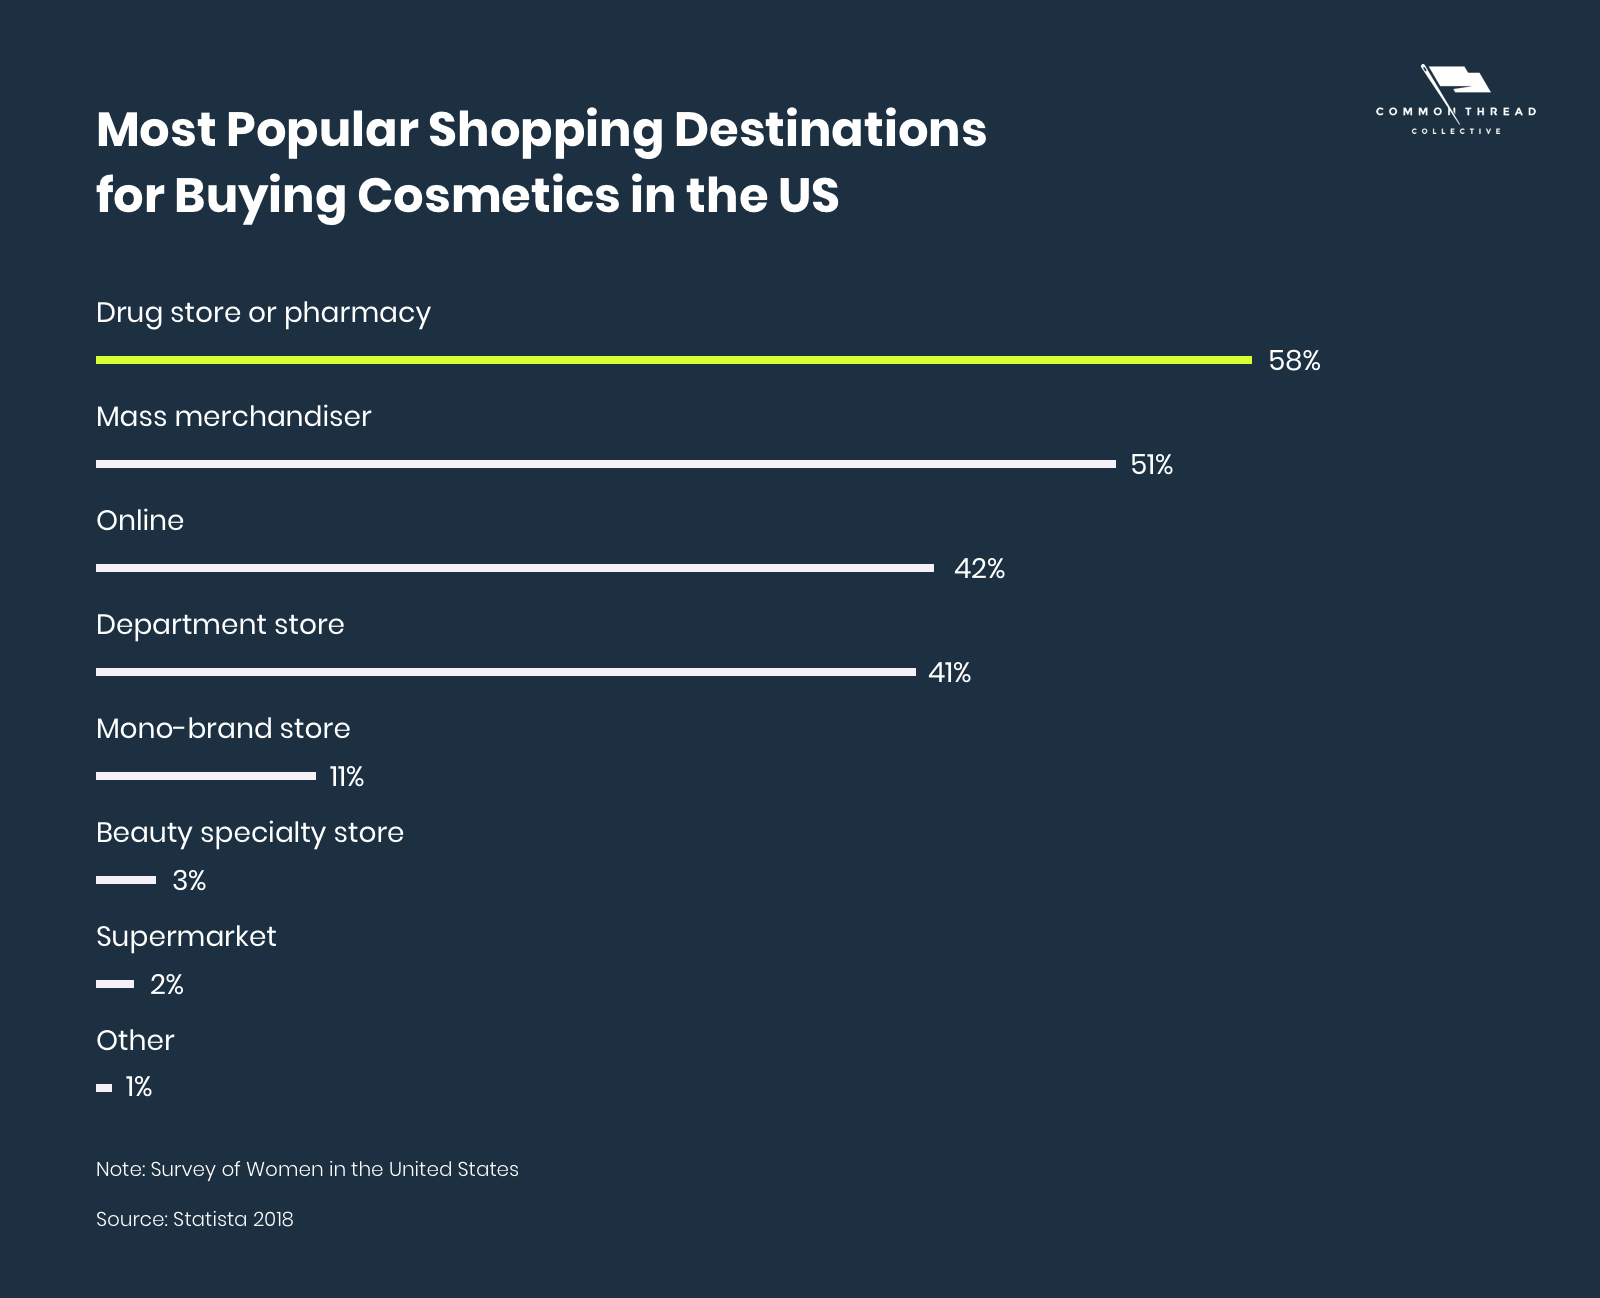 Most Popular Shopping Destinations for Buying Cosmetics in the US